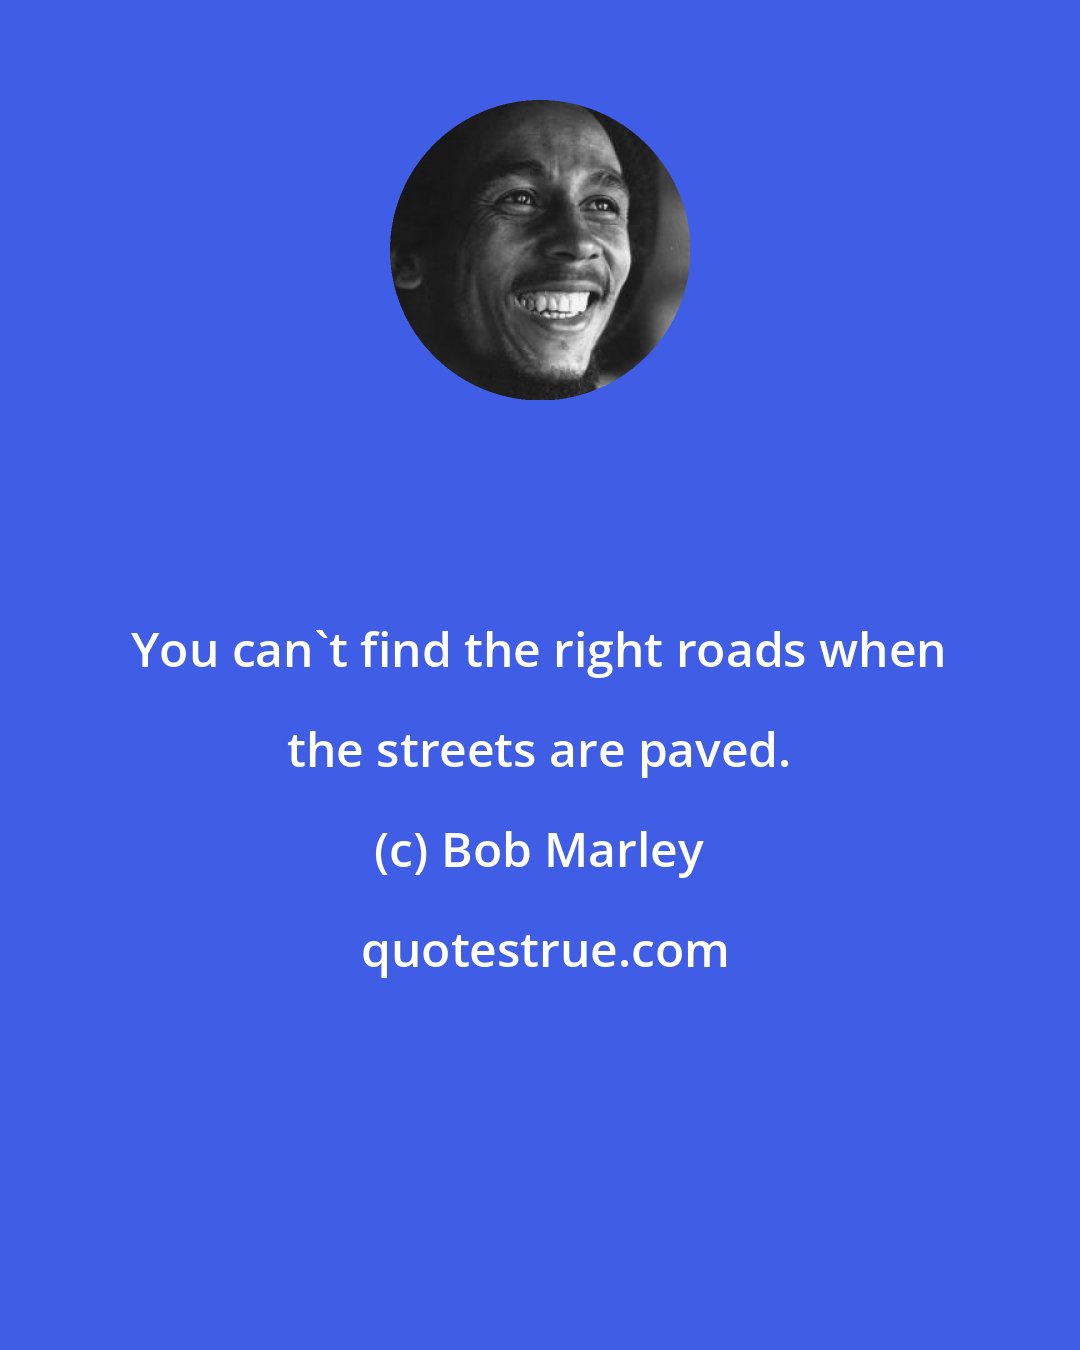 Bob Marley: You can't find the right roads when the streets are paved.